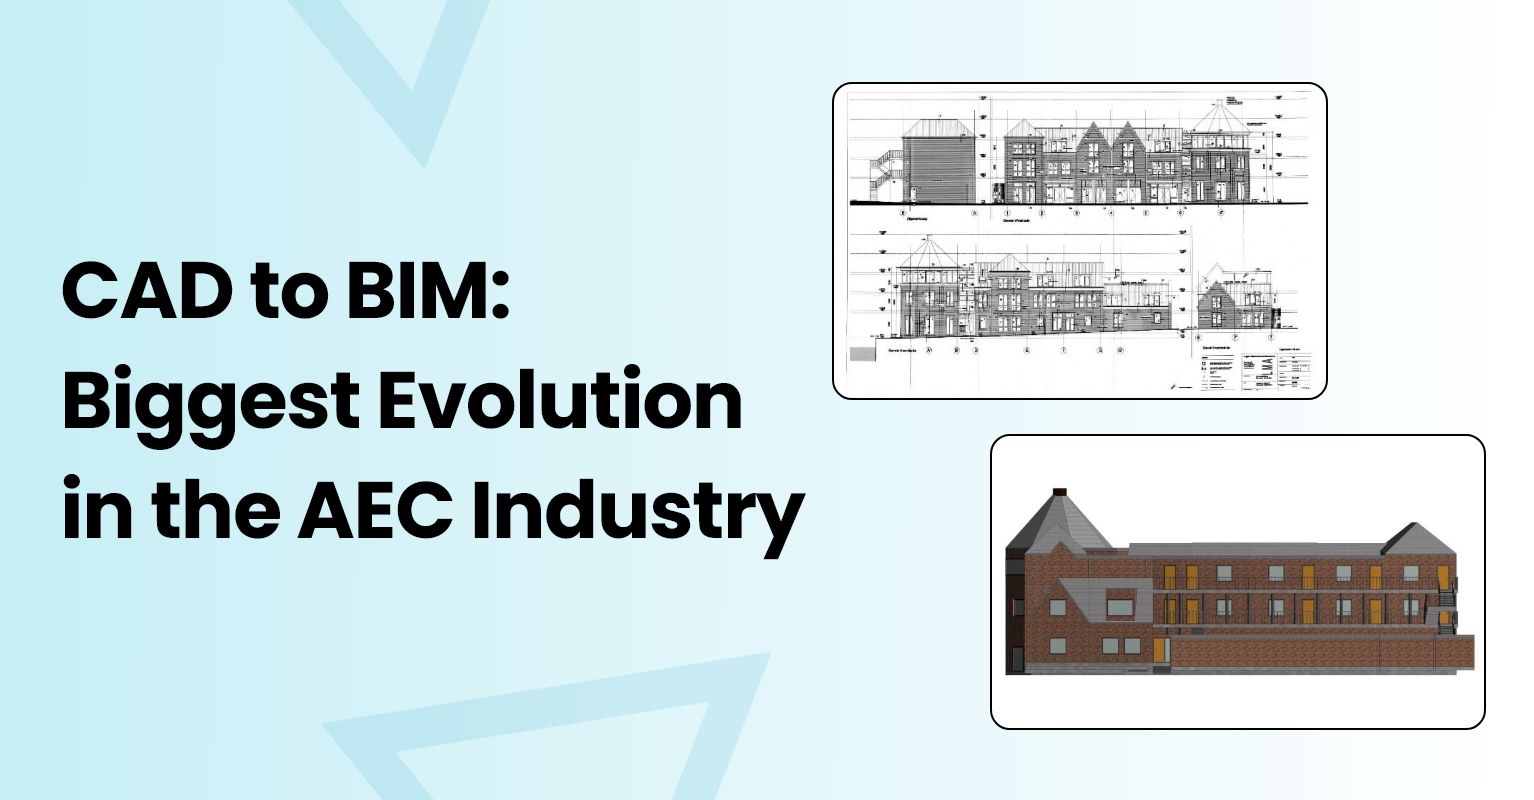 CAD to BIM: Biggest Evolution in the AEC Industry